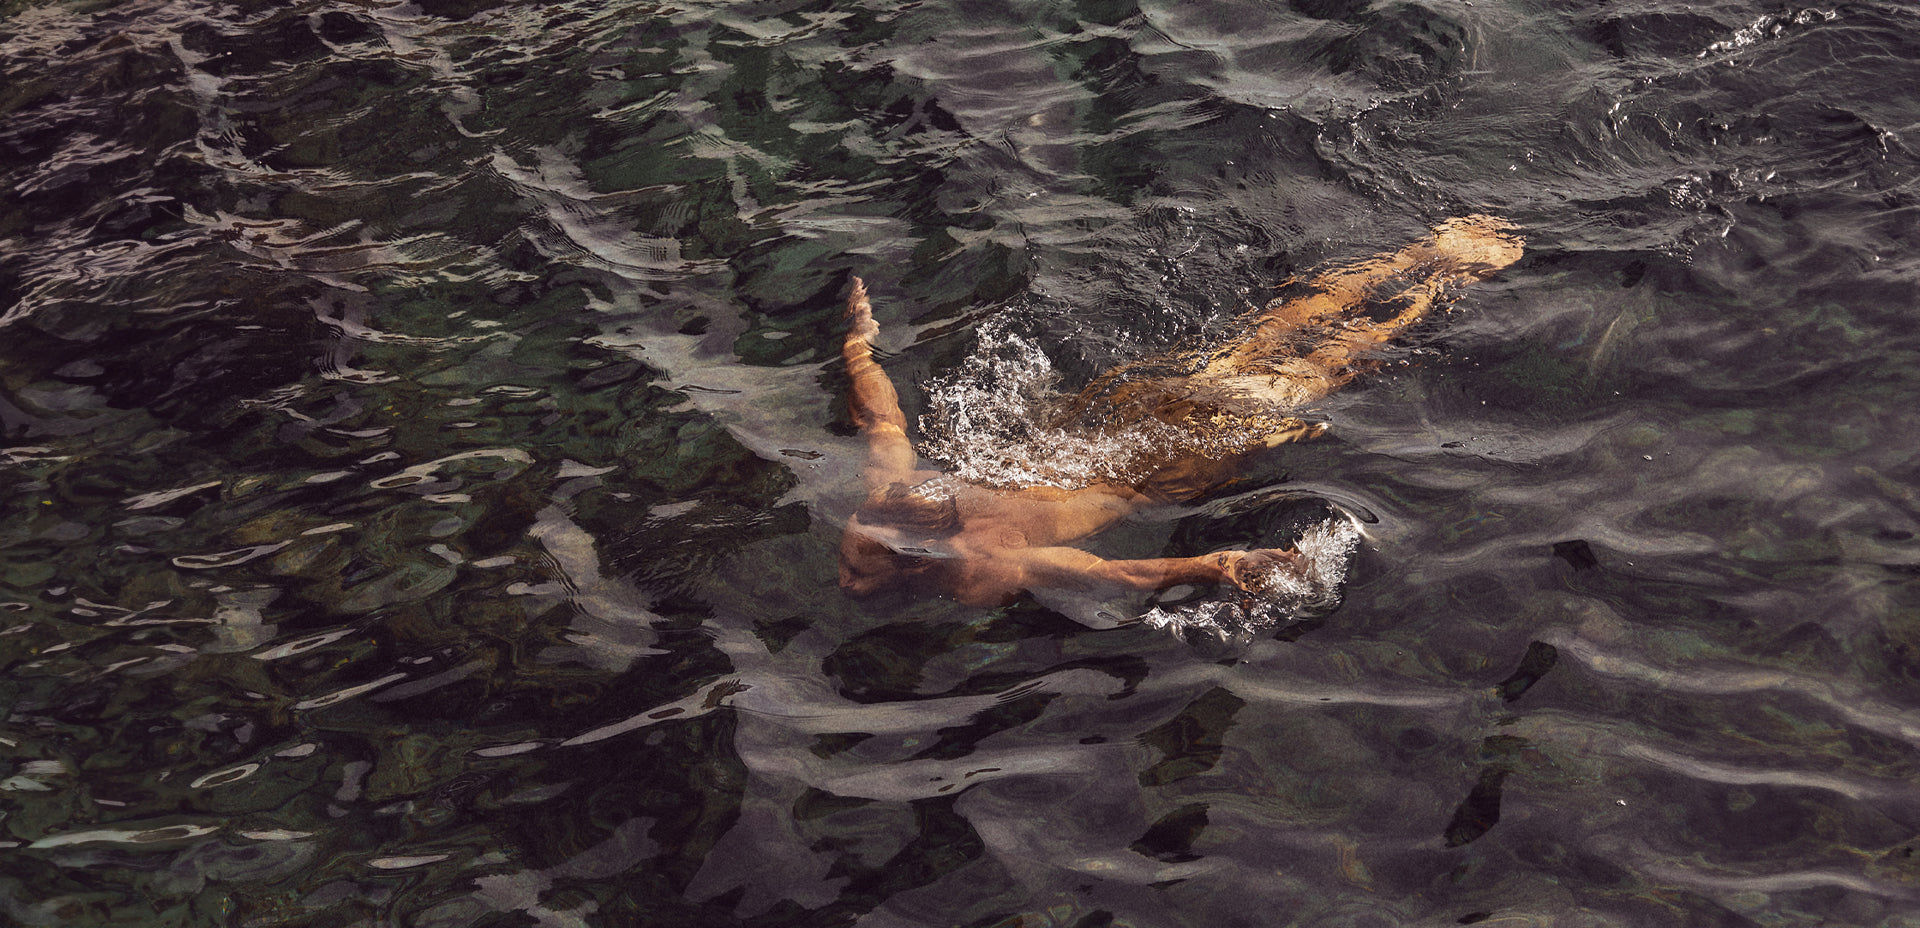 How to Choose Sustainable Swimwear for Open Water Swimming